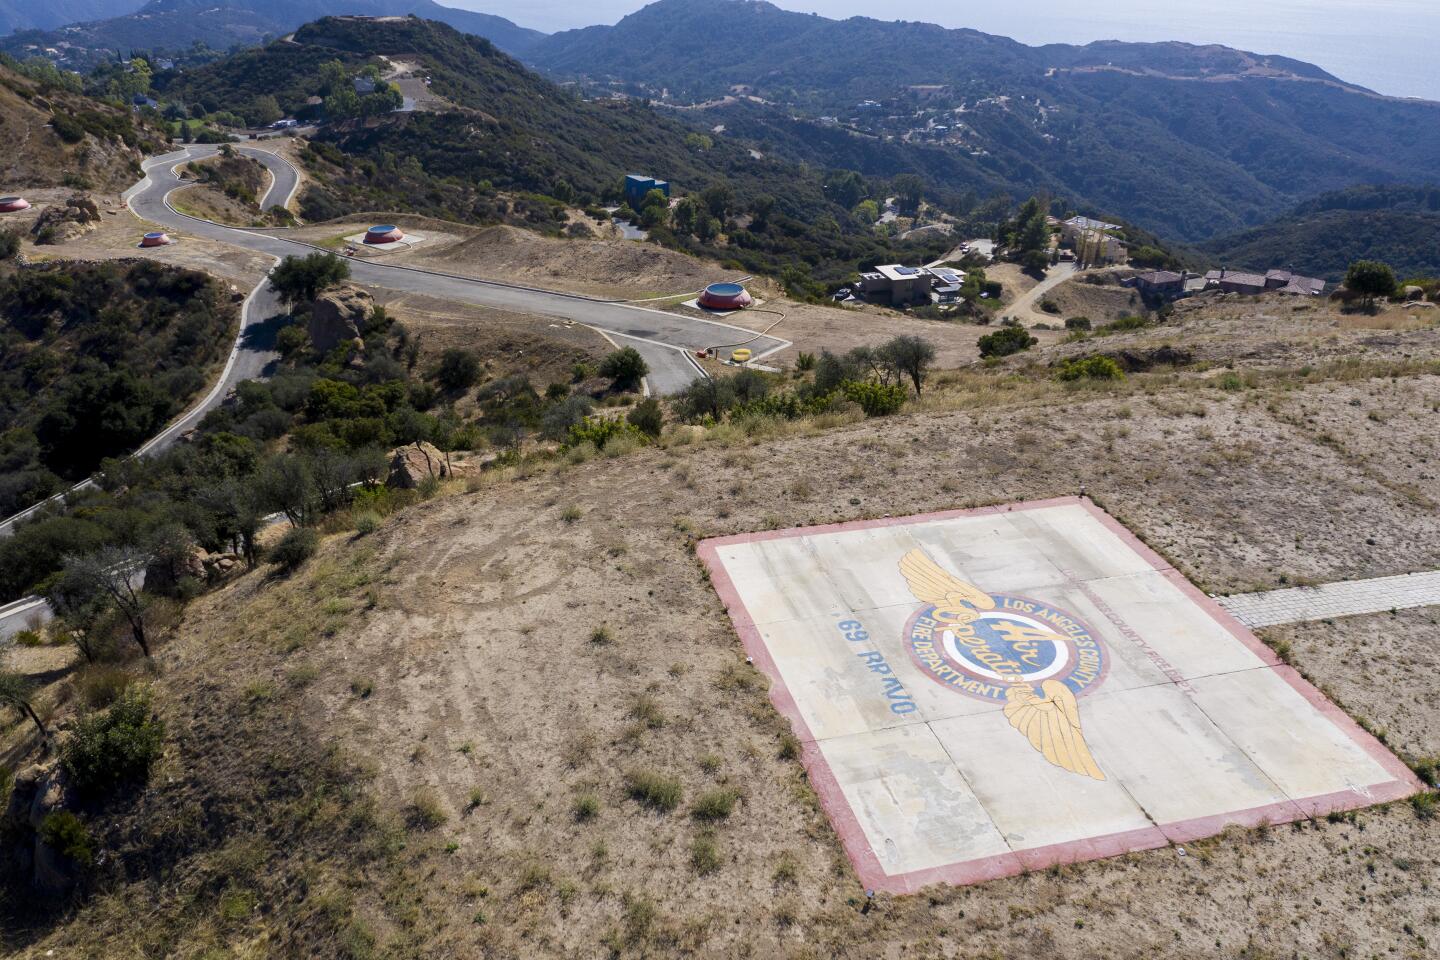 Remote wildfire base in the Santa Monica Mountains